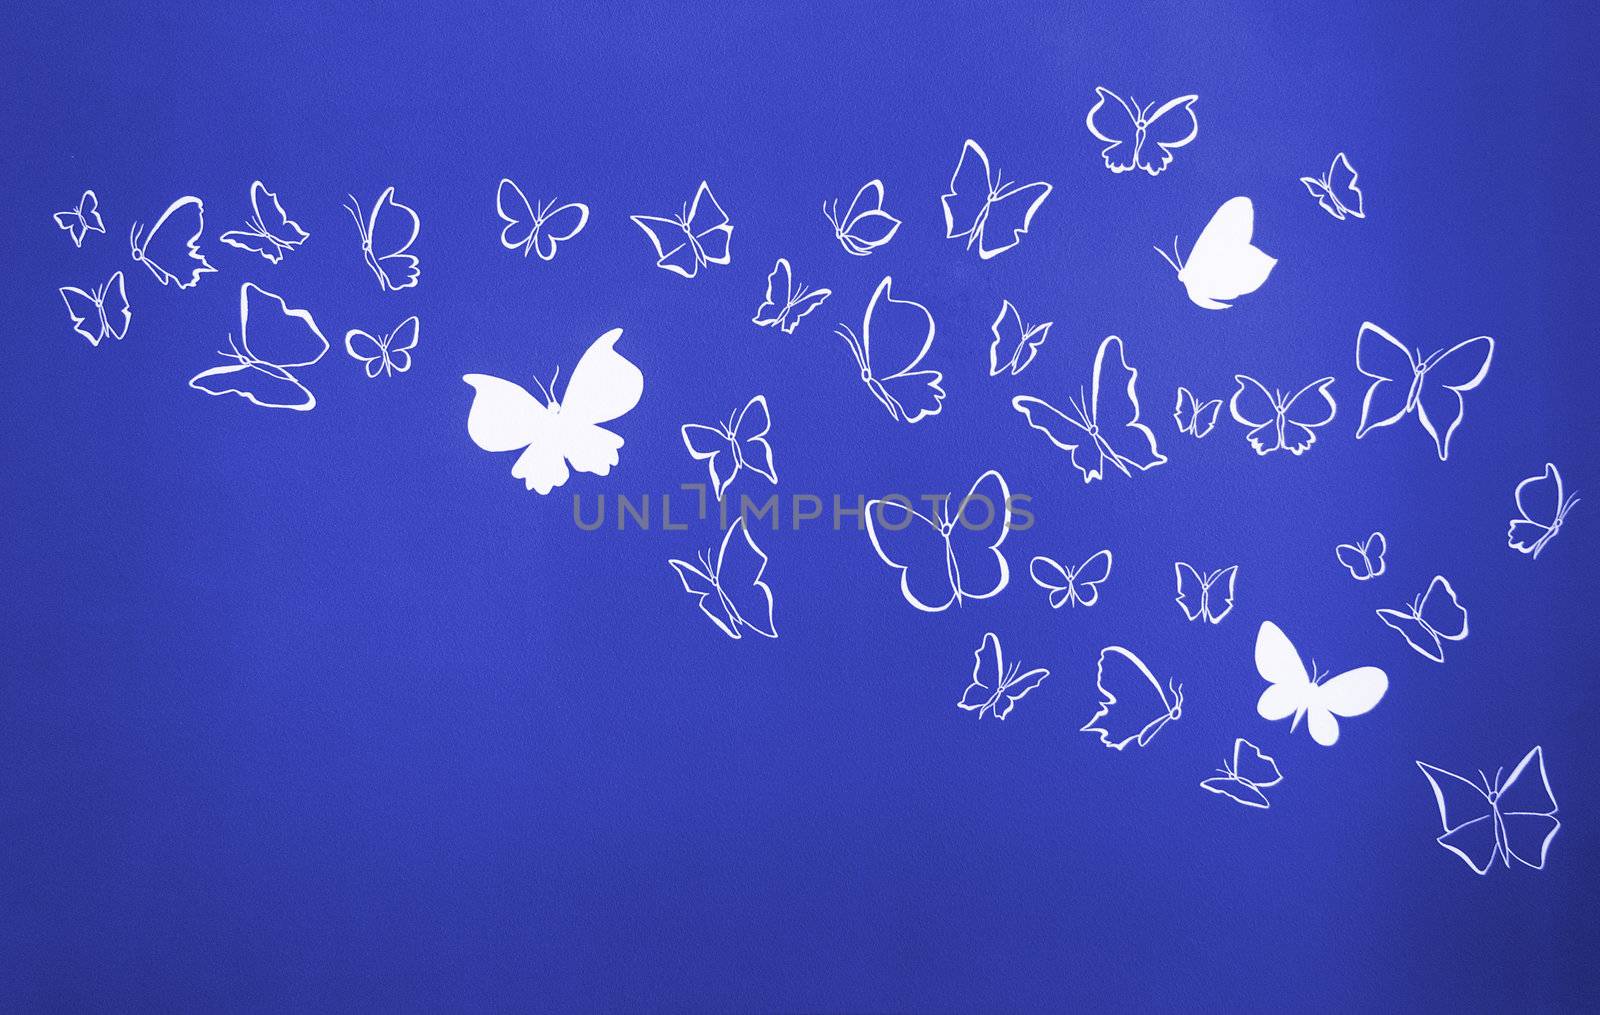 Group of white silhouettes butterflies flying over a blue background